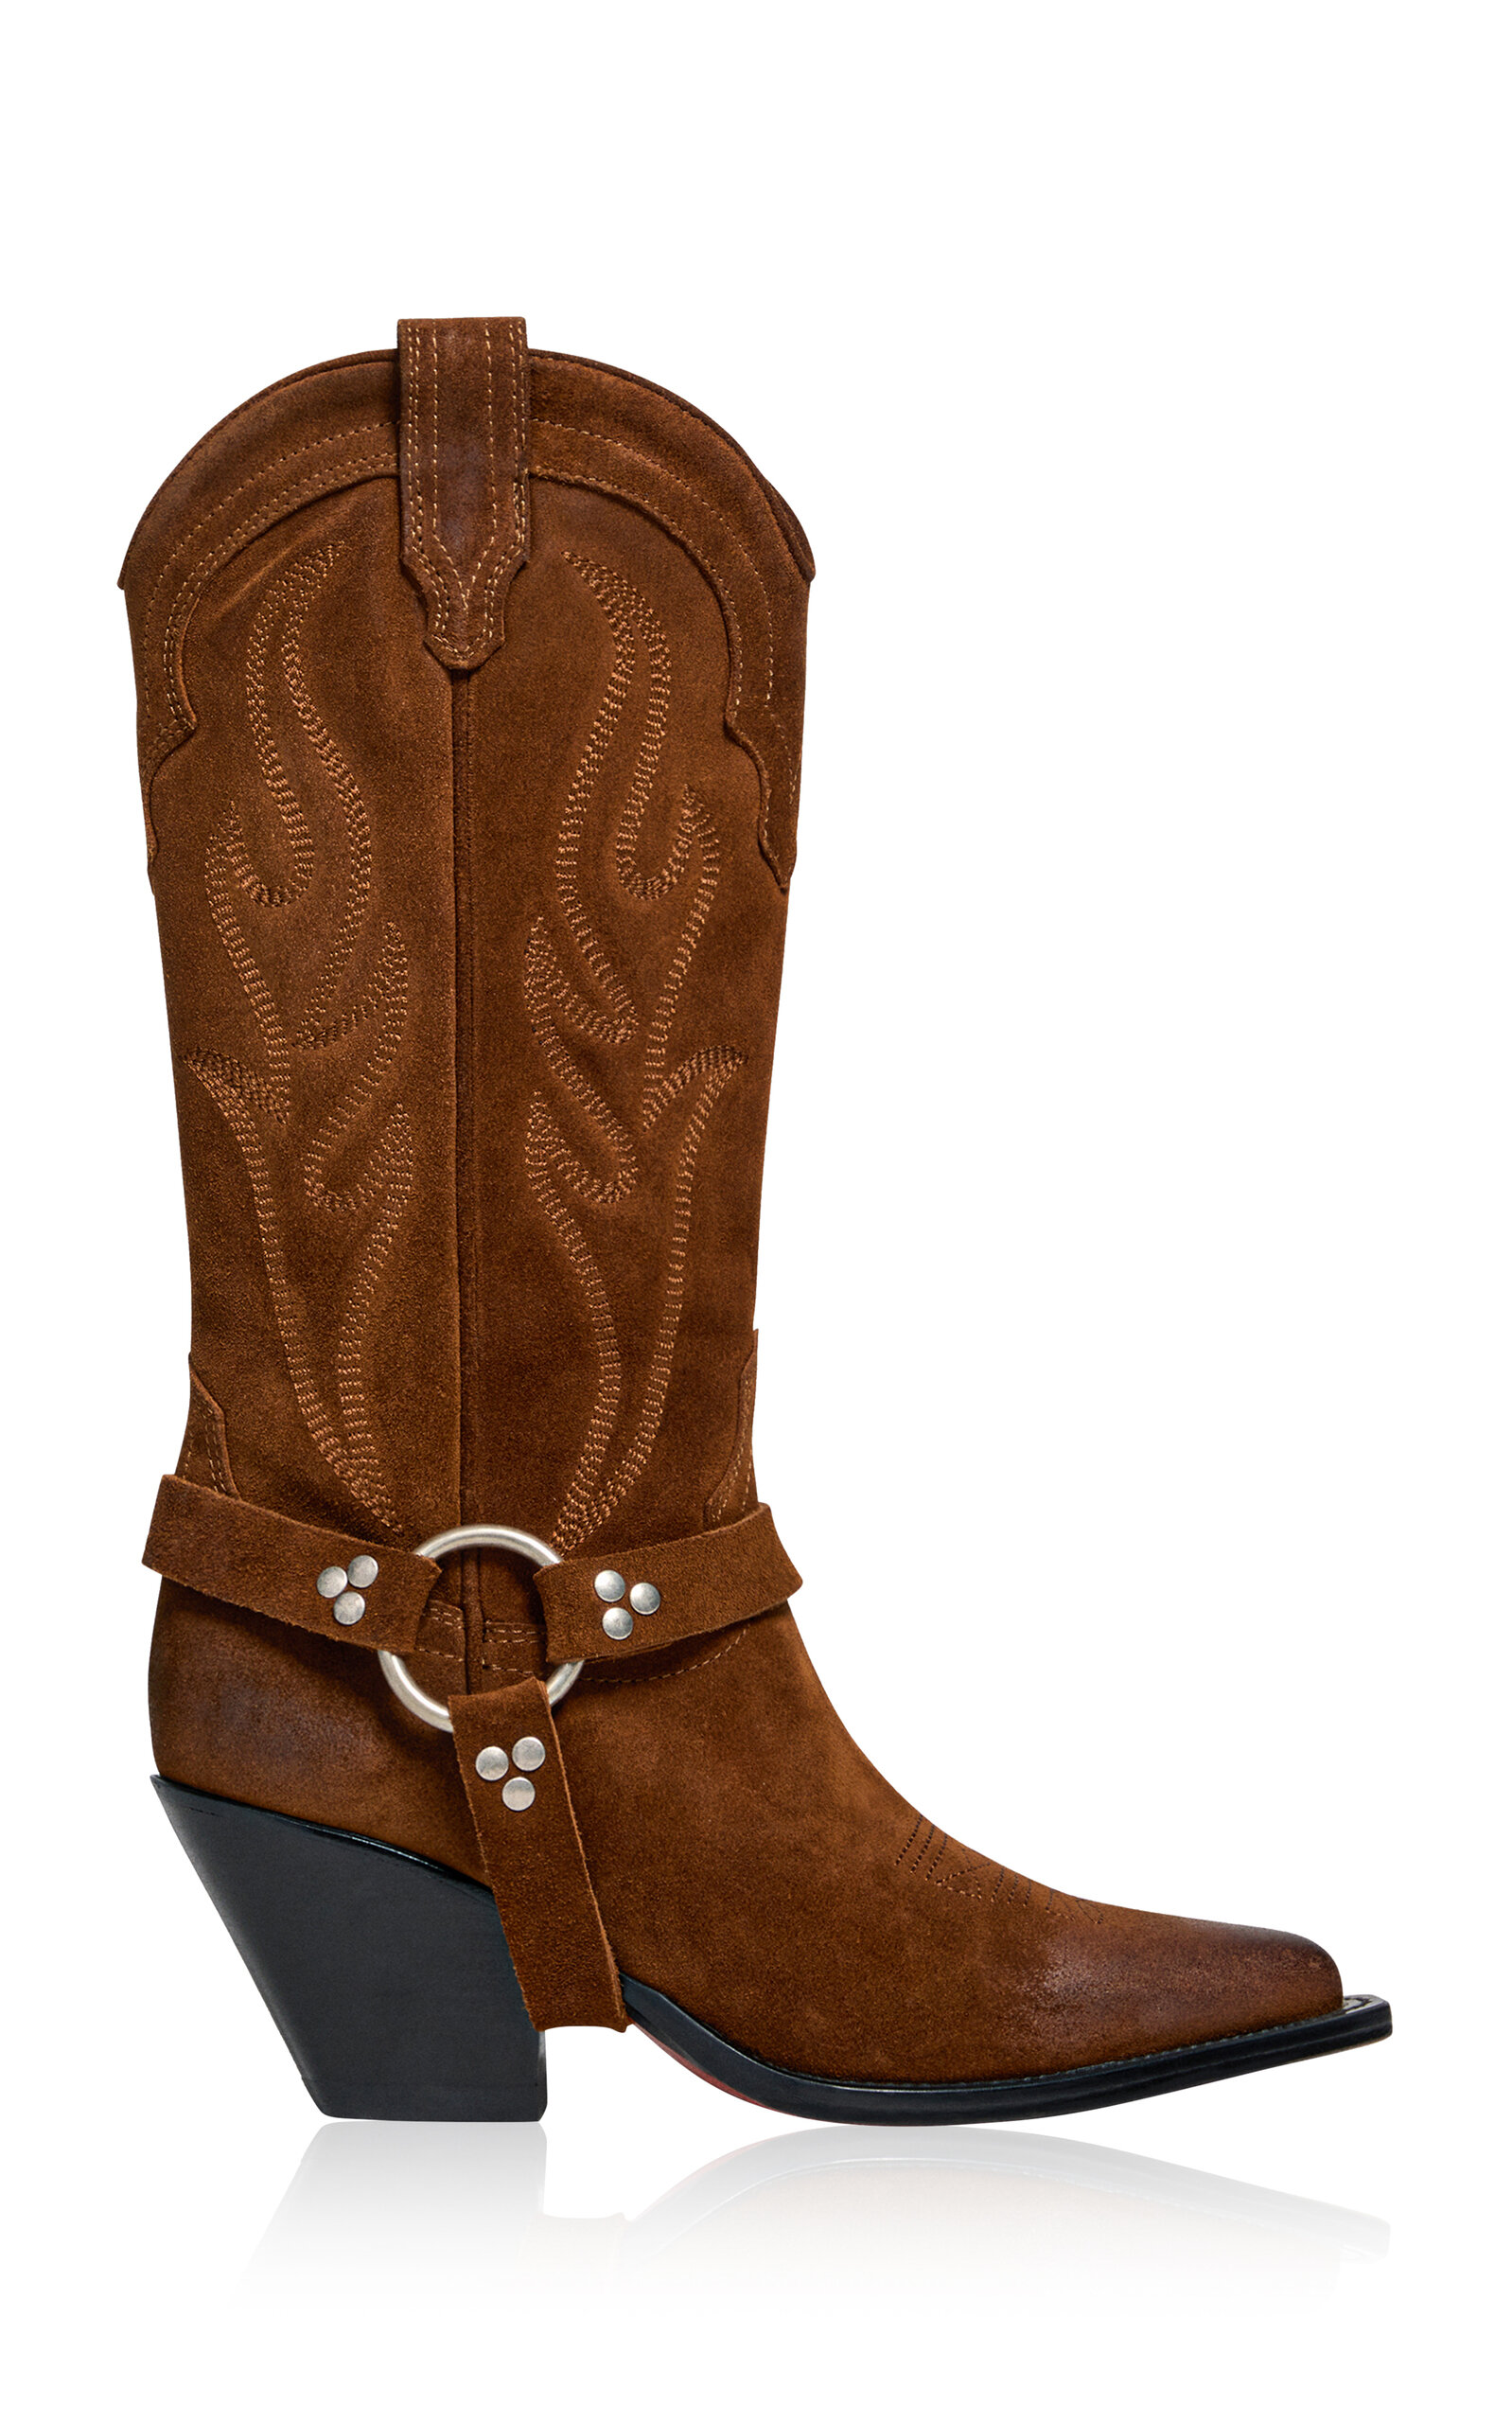 Santa Fe Embroidered Suede Western Boots